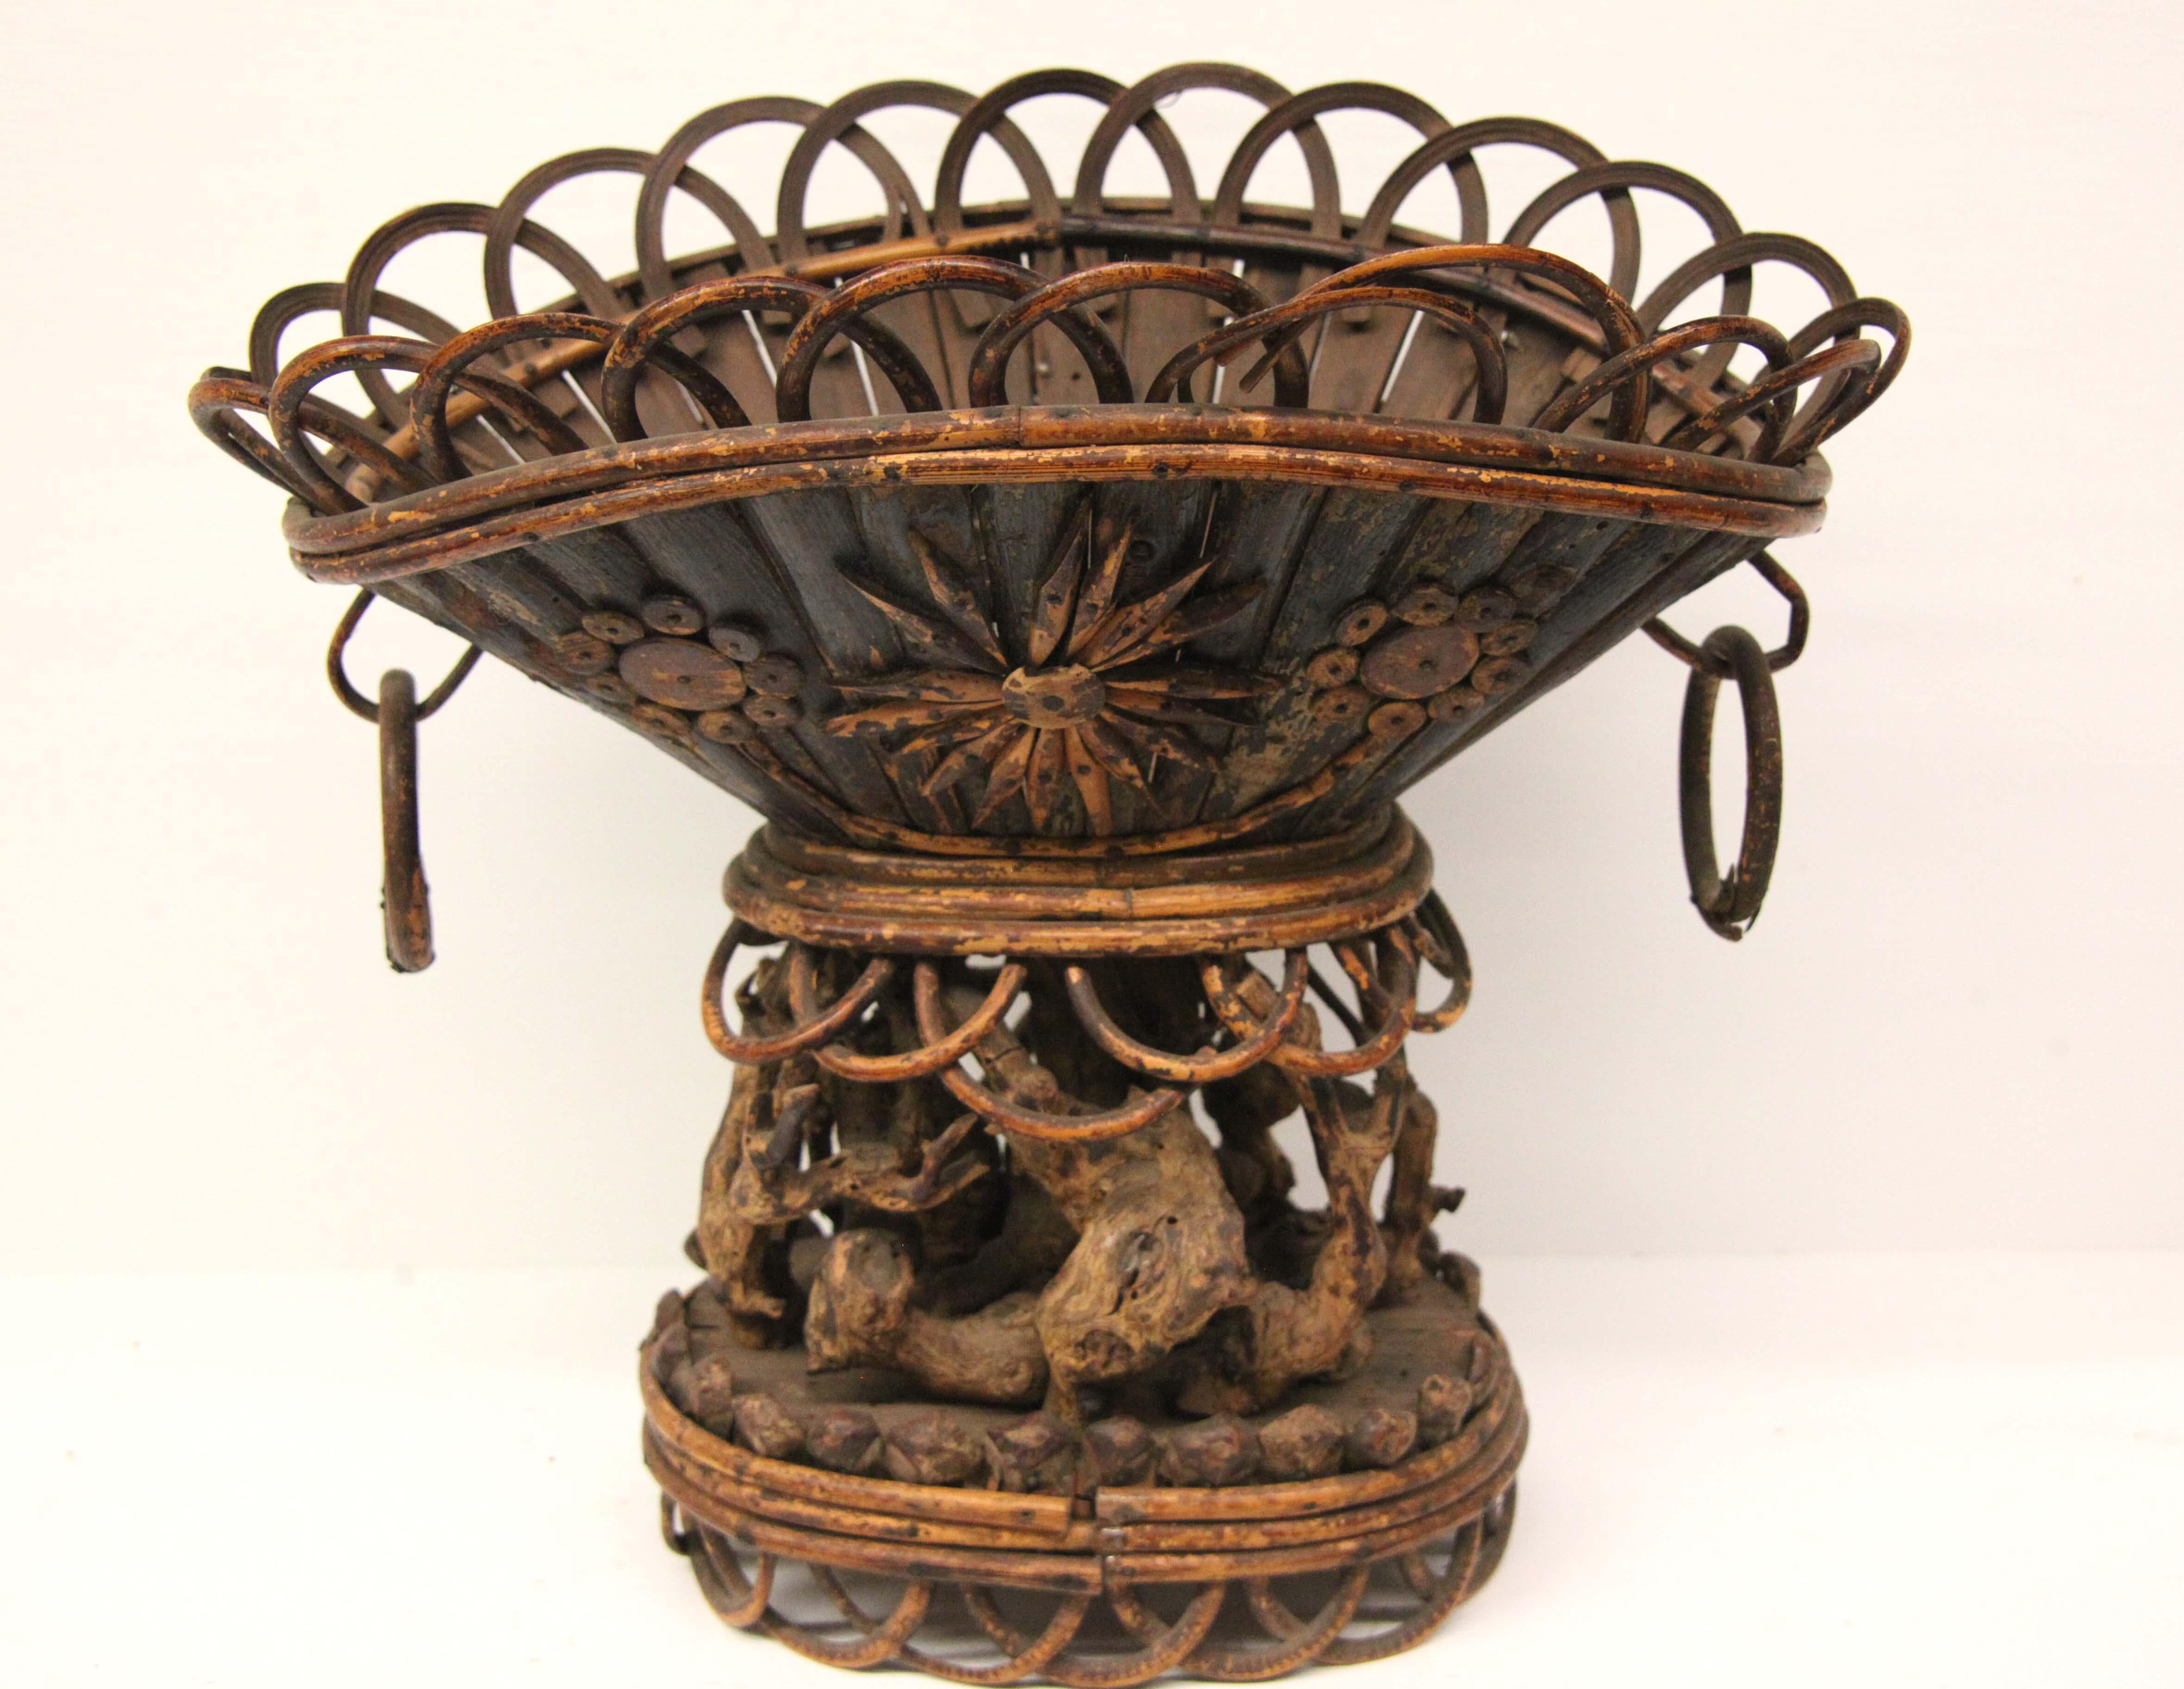 Oval Folk Art Basket Centerpiece In Good Condition For Sale In Wilson, NC